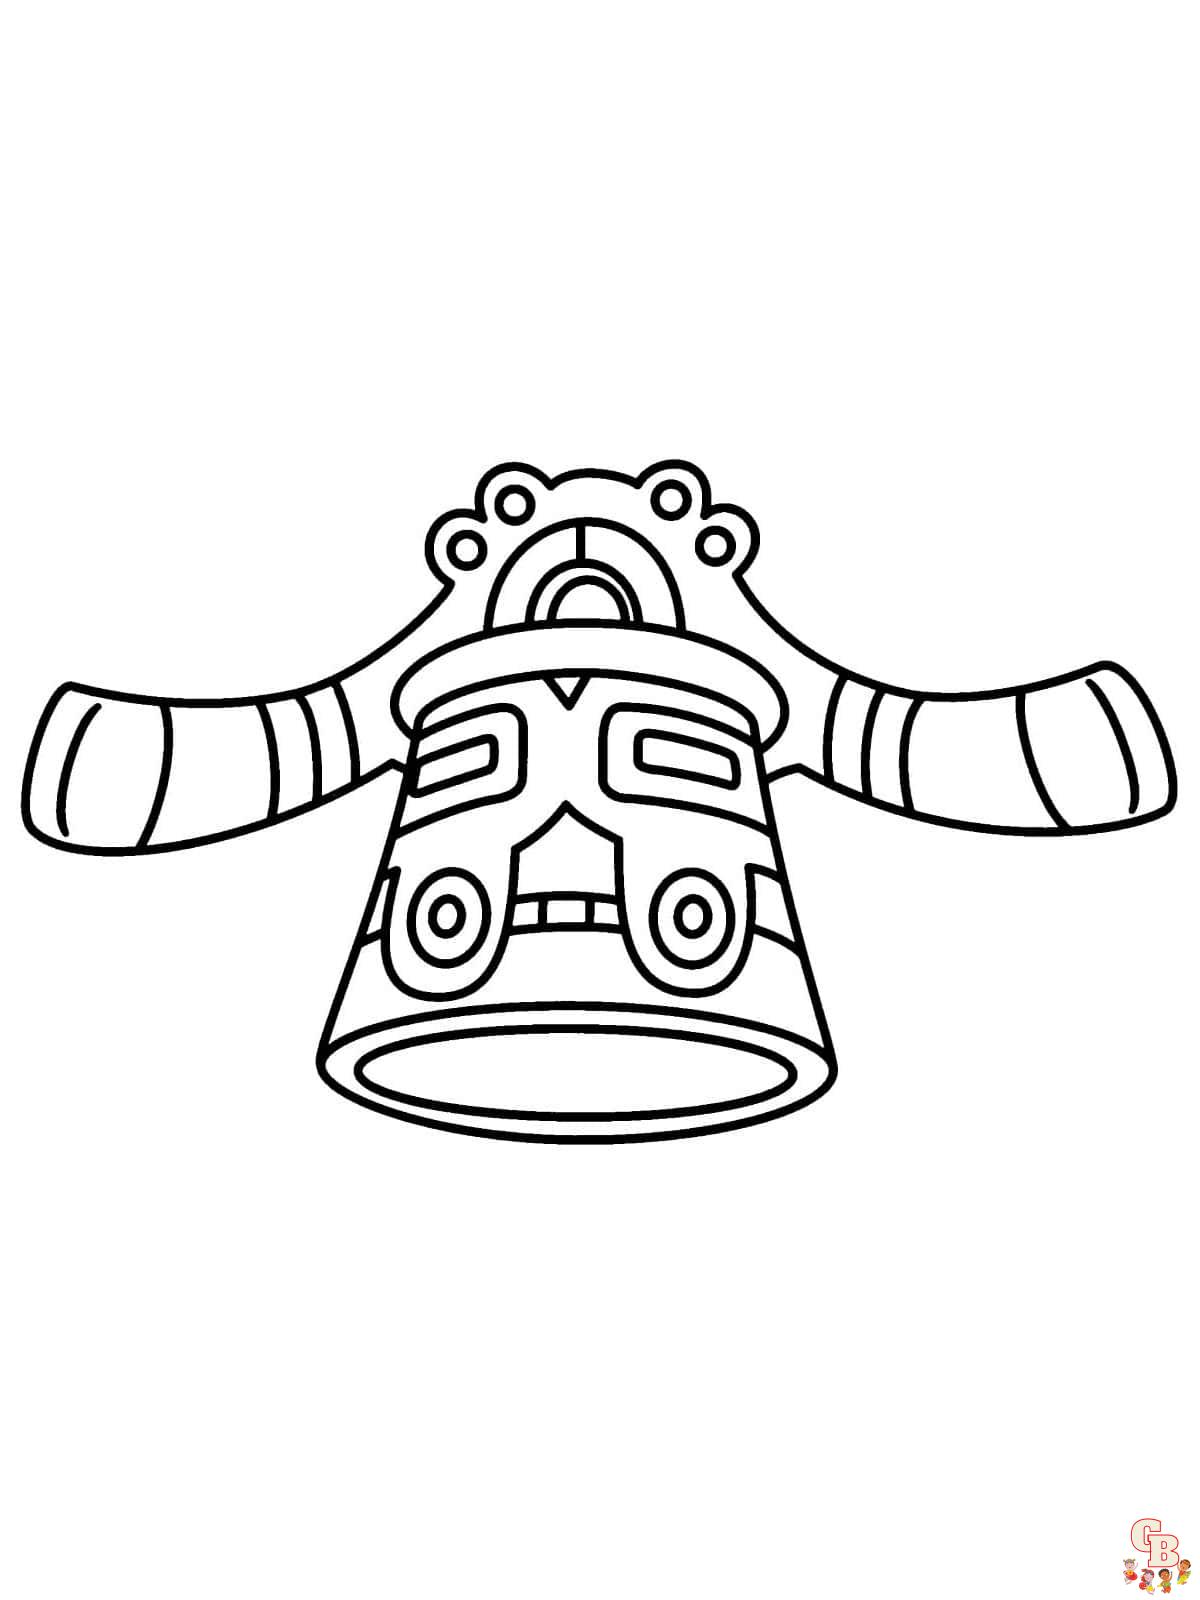 Pokemon Bronzong coloring pages